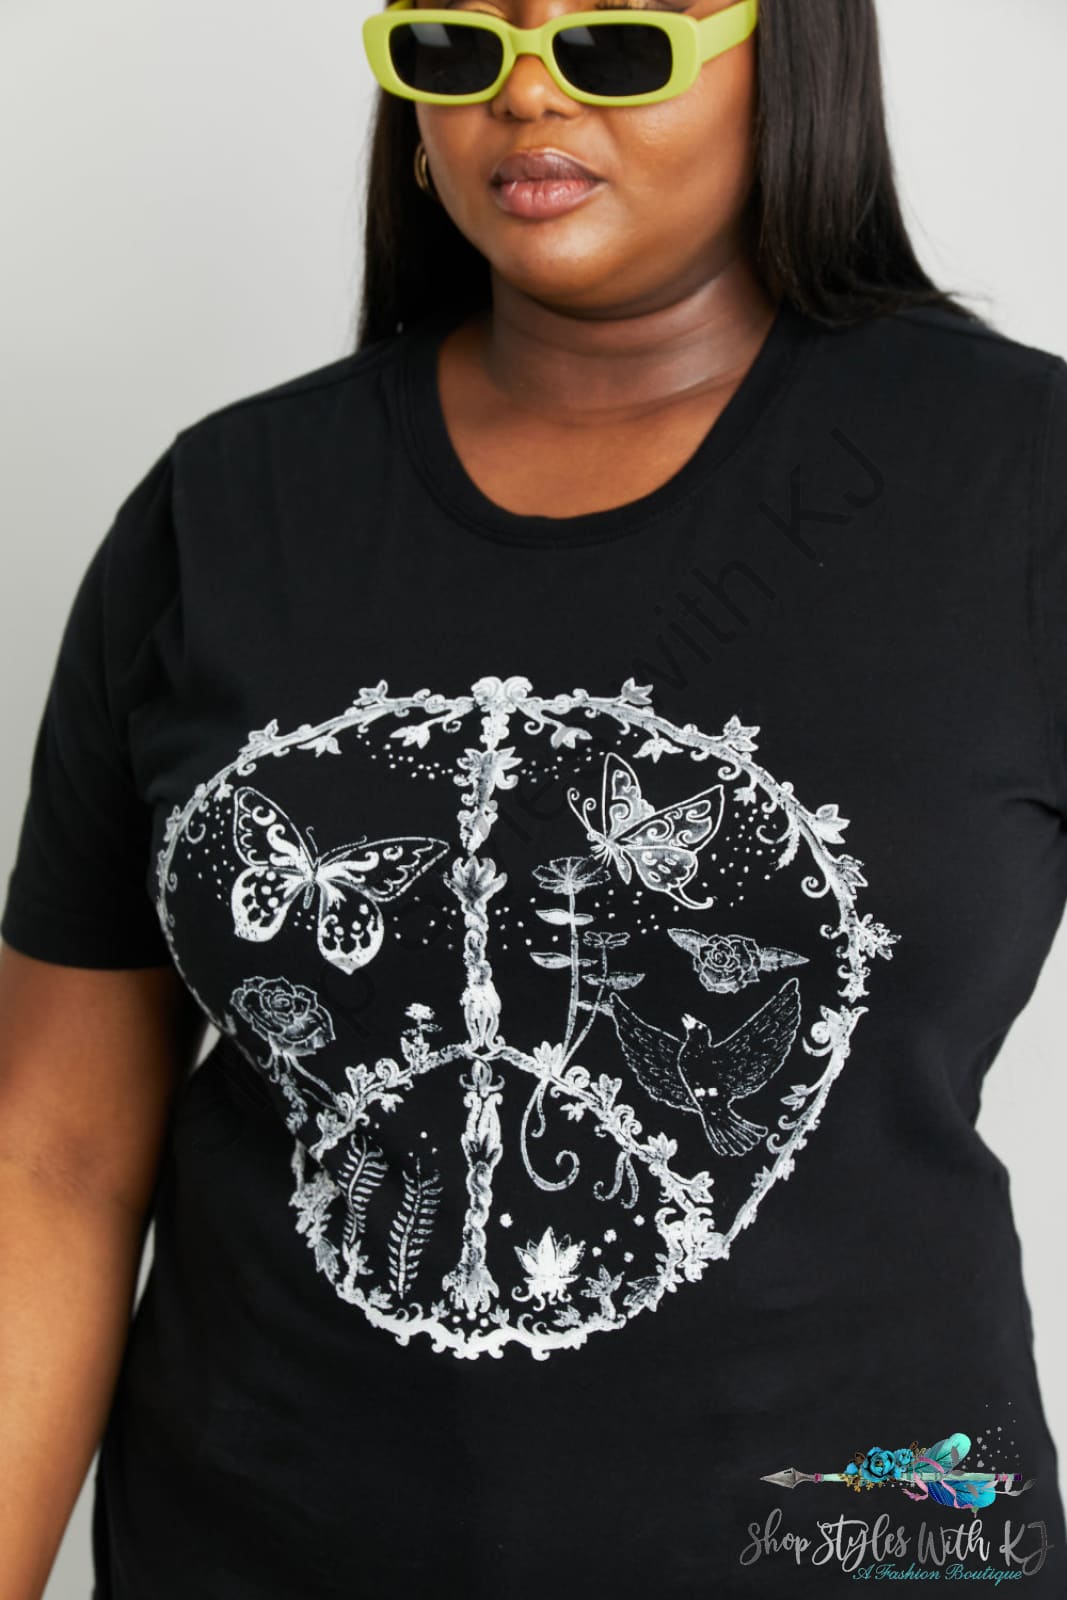 Butterfly Graphic Tee Shirt Shirts & Tops